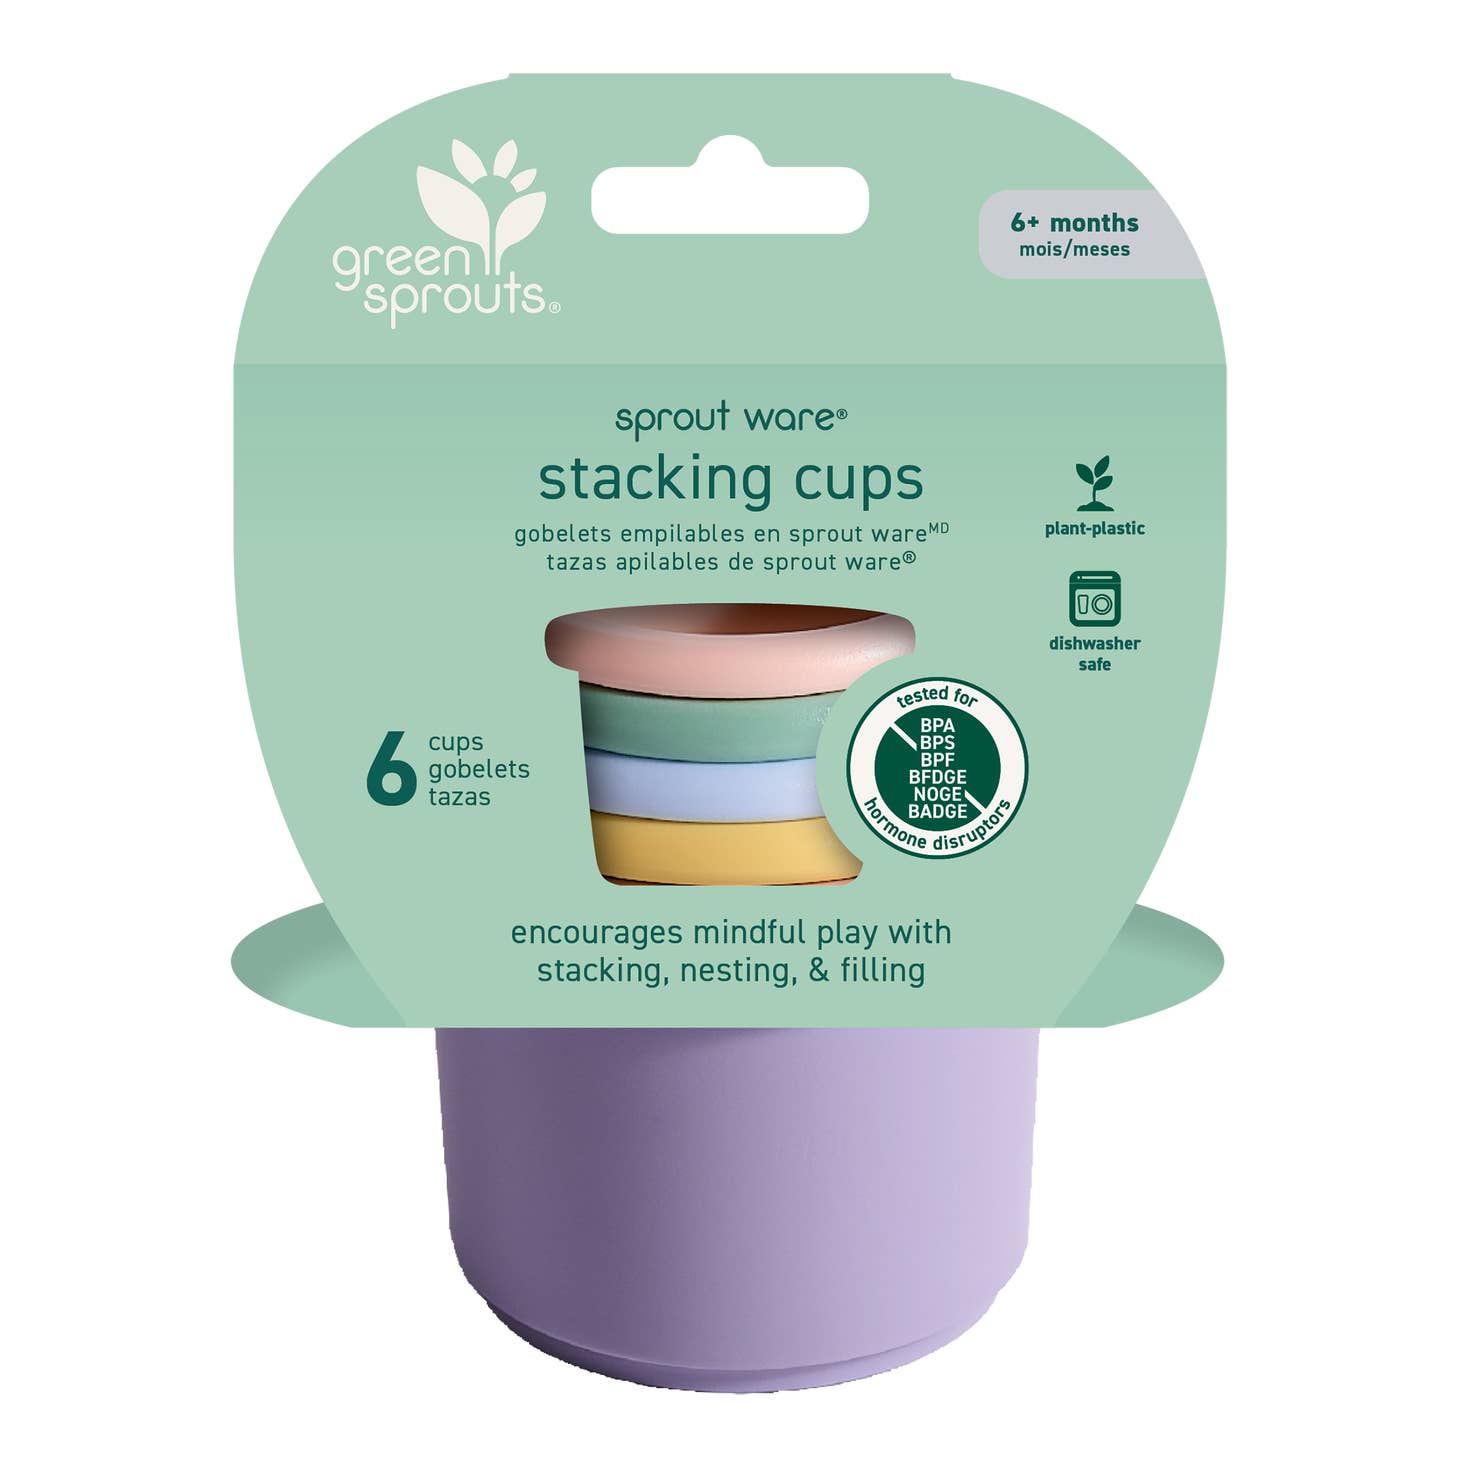 Green Sprouts Stacking Cups made from Plants